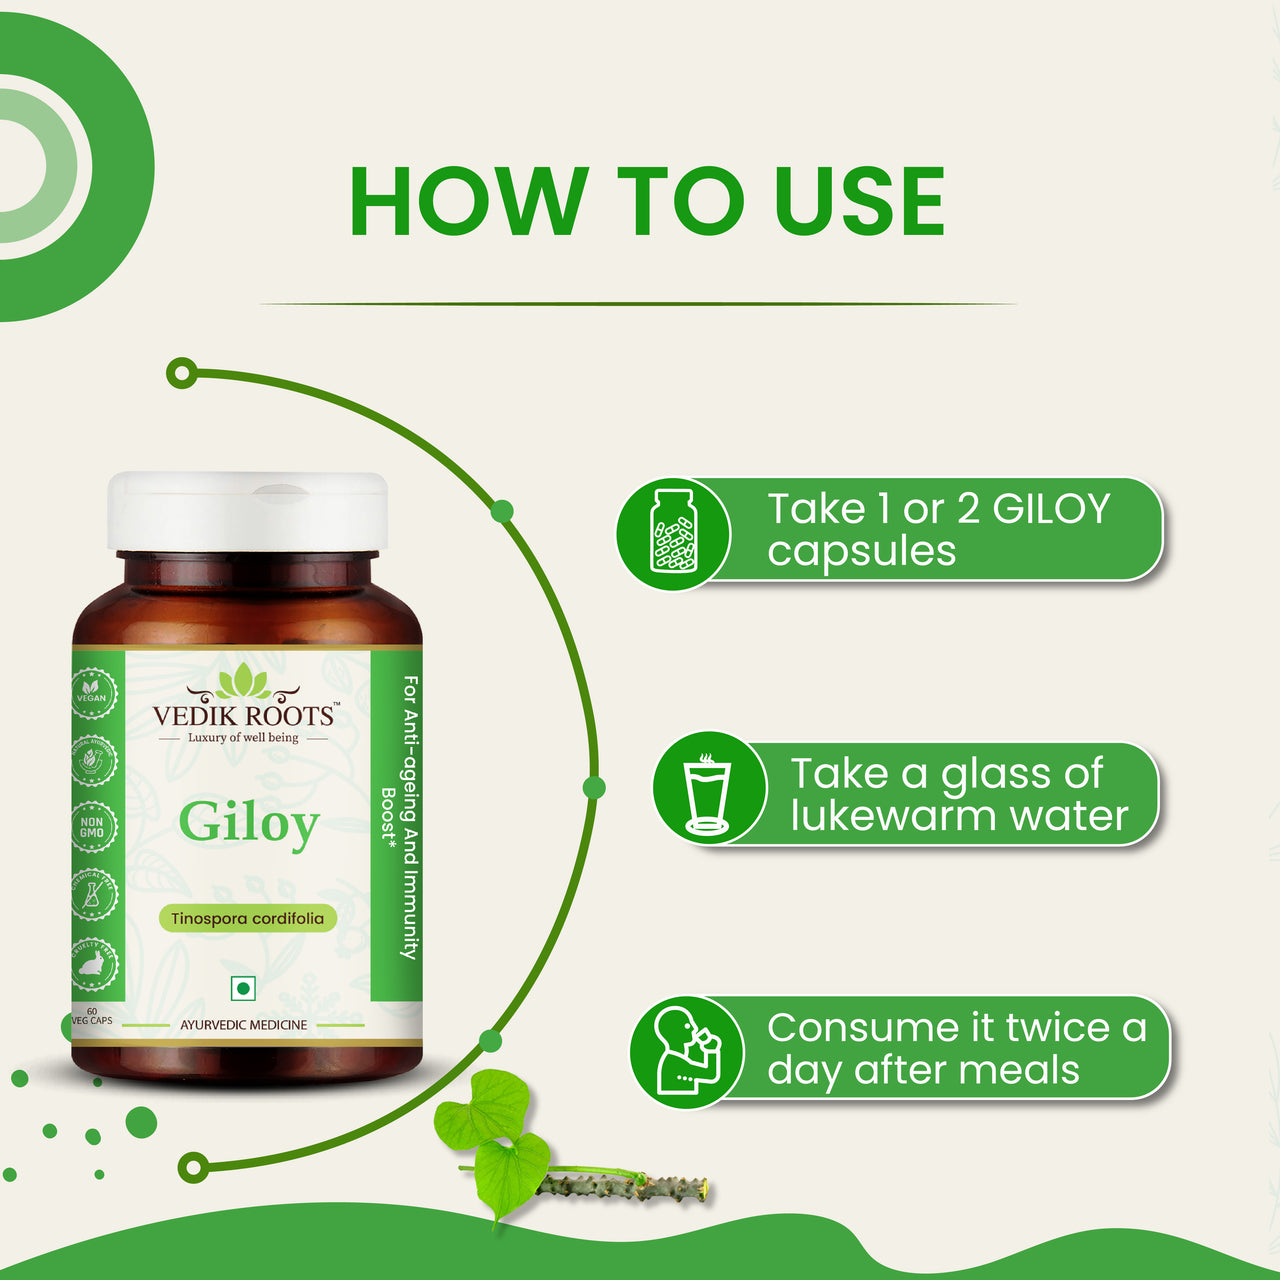 how to take vedikroots giloy capsules